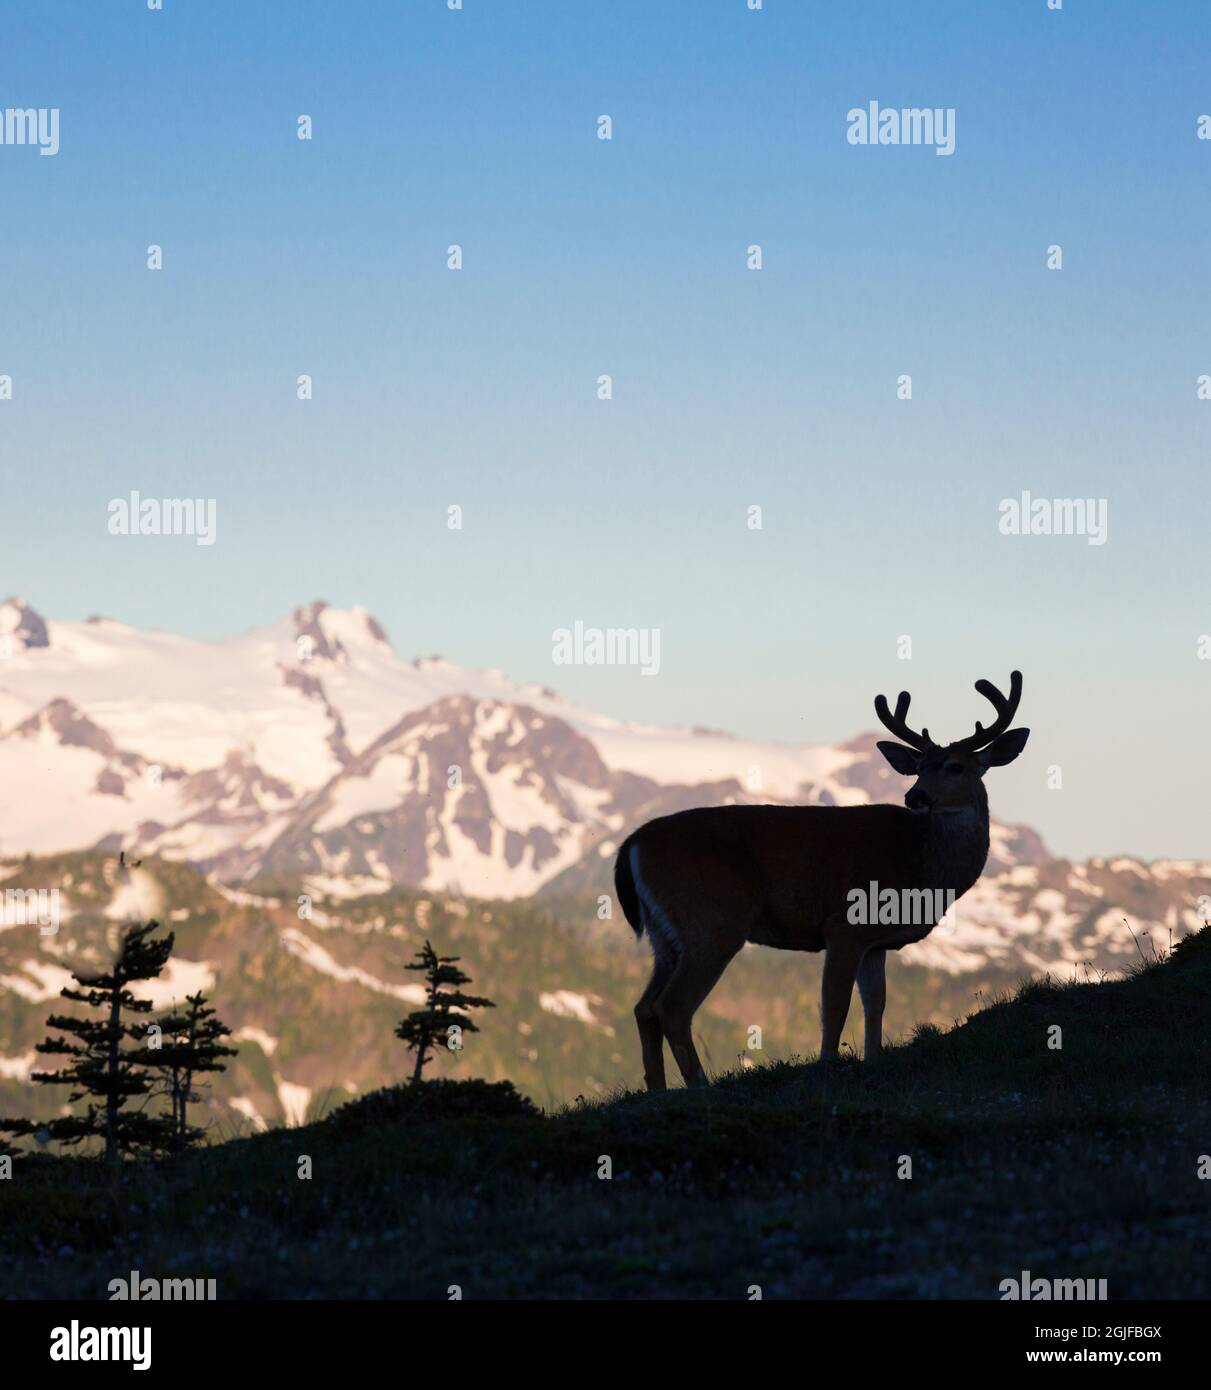 USA, Staat Washington. Olympic National Park. Silhouetted Black-tailed Bock in Samt mit Mt. Olympus im Hintergrund. Stockfoto